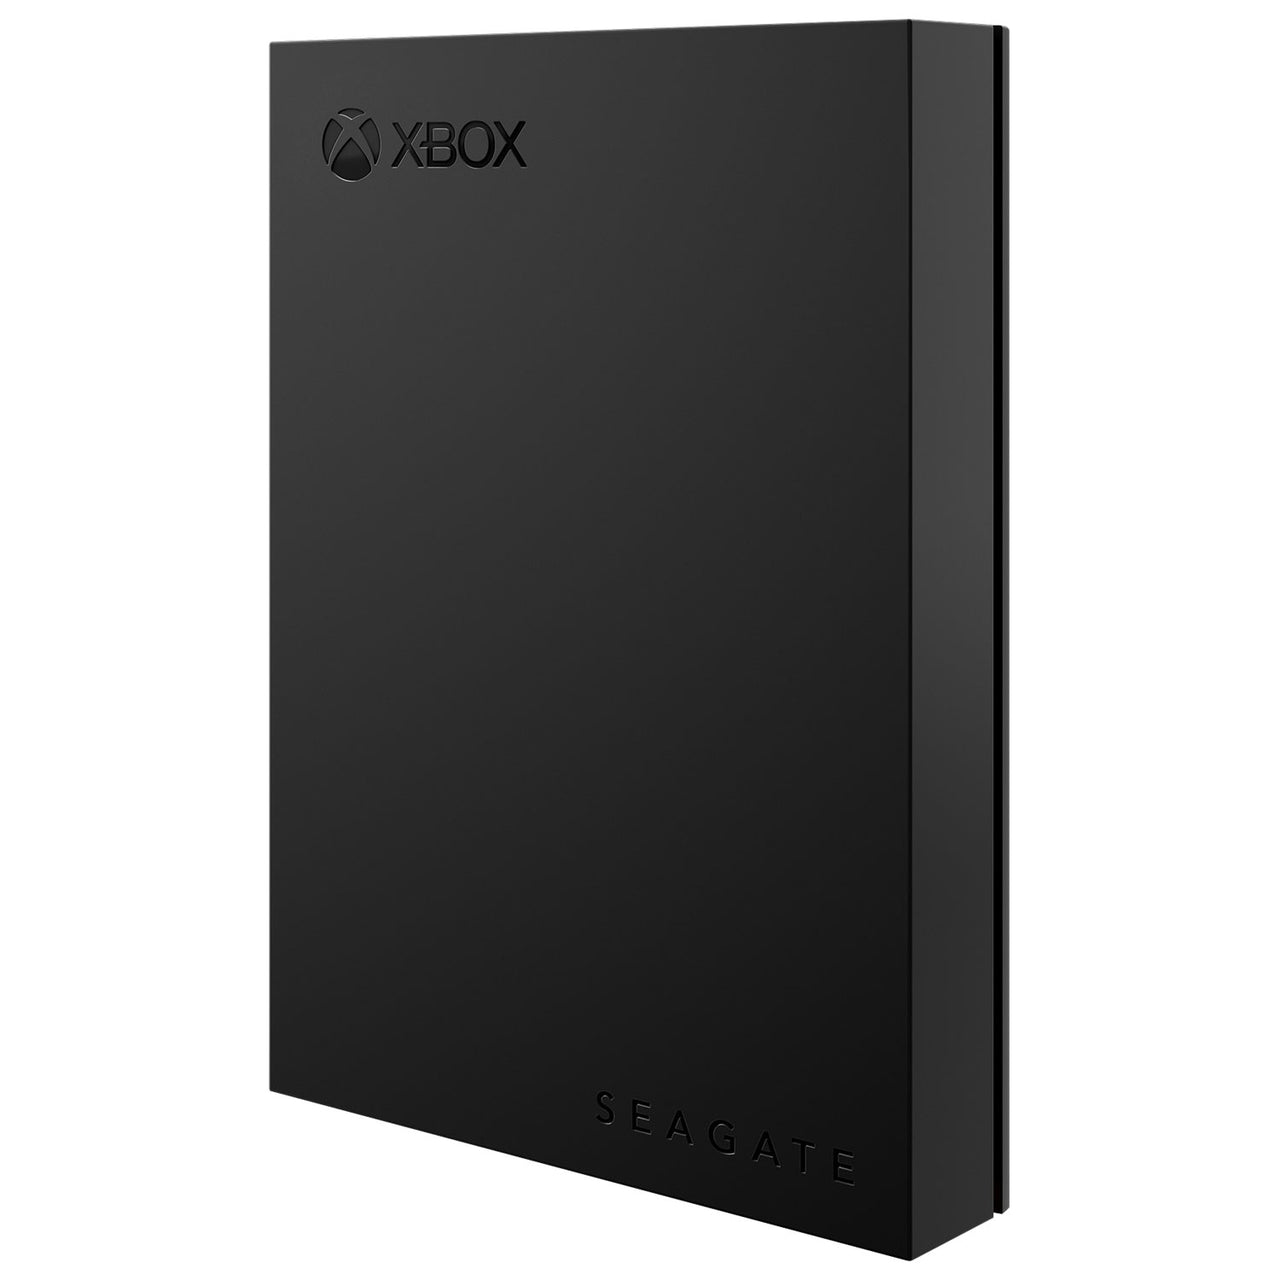 Seagate Xbox Certified 4TB USB 3.0 Portable External Hard Drive with Green LED Bar (STKX4000402)